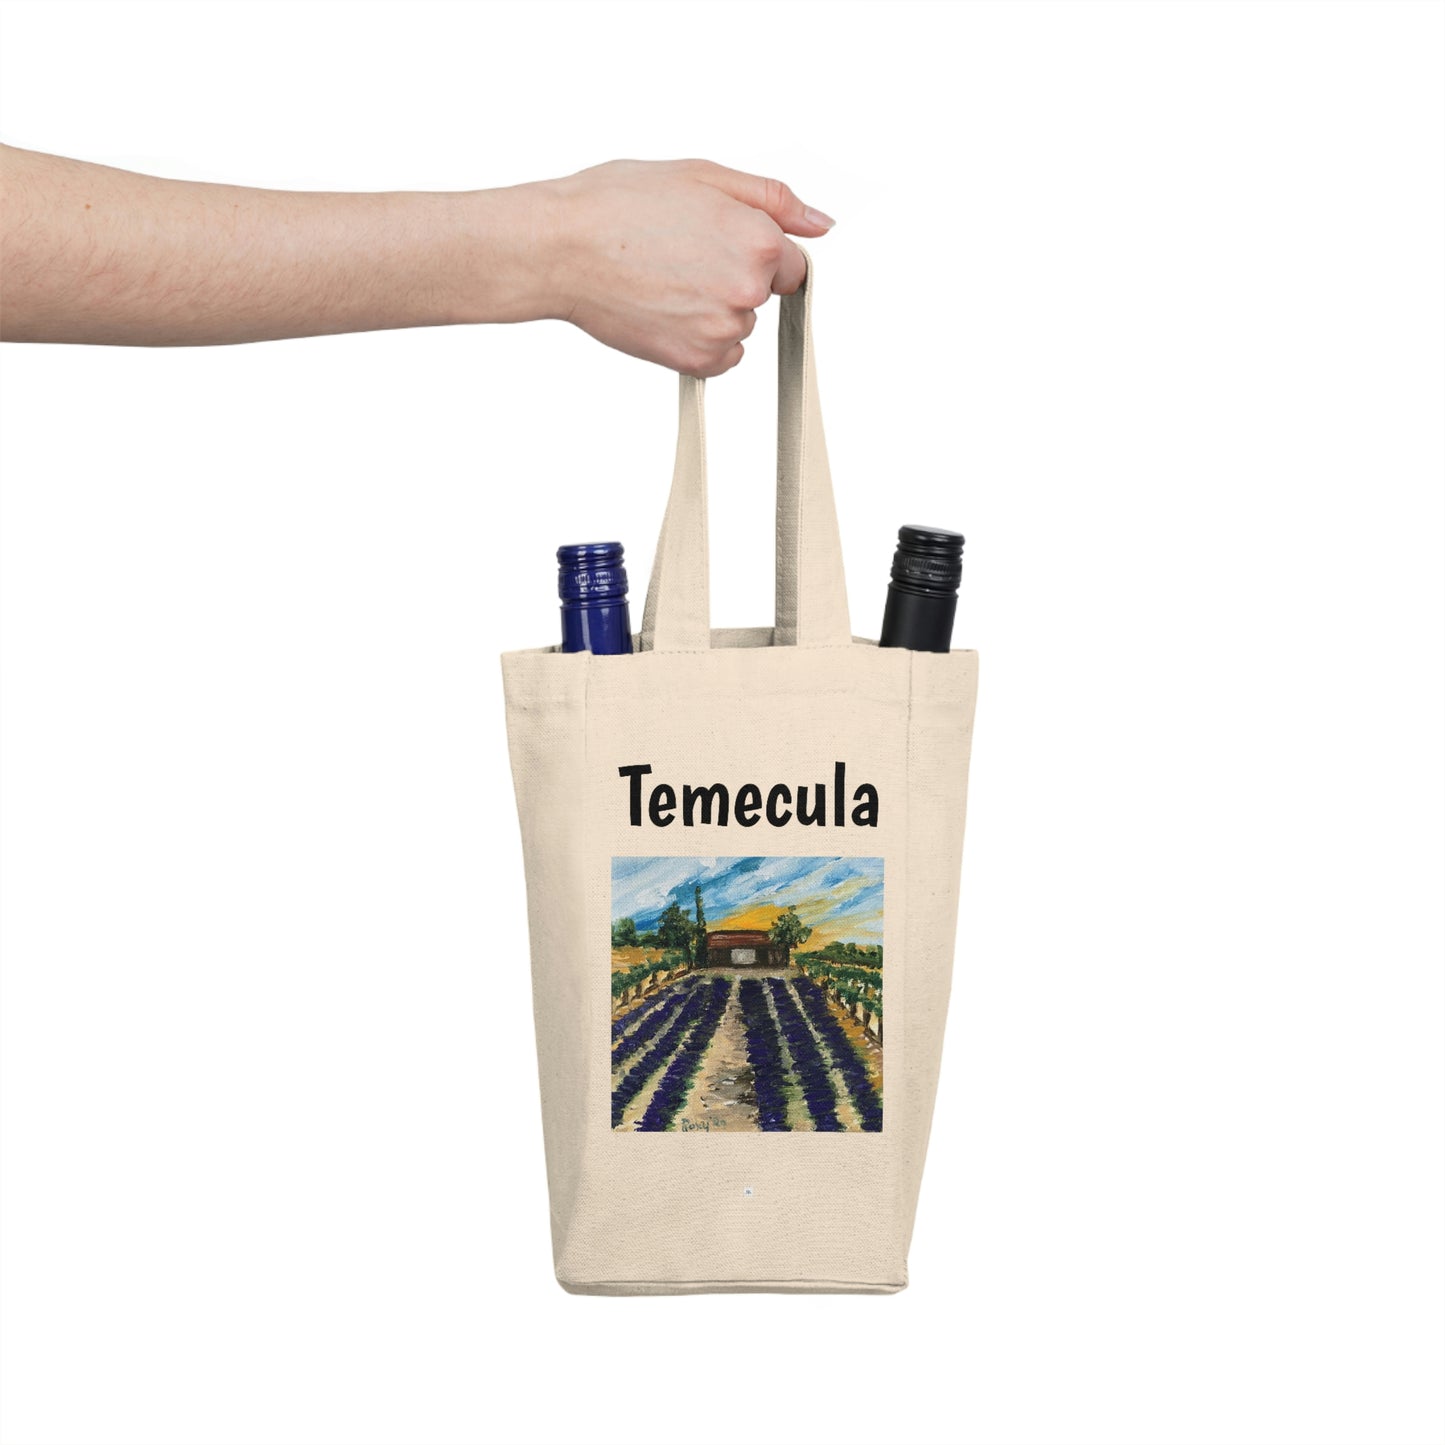 Temecula Double Wine Tote Bag featuring "Temecula Lavender Farm" painting